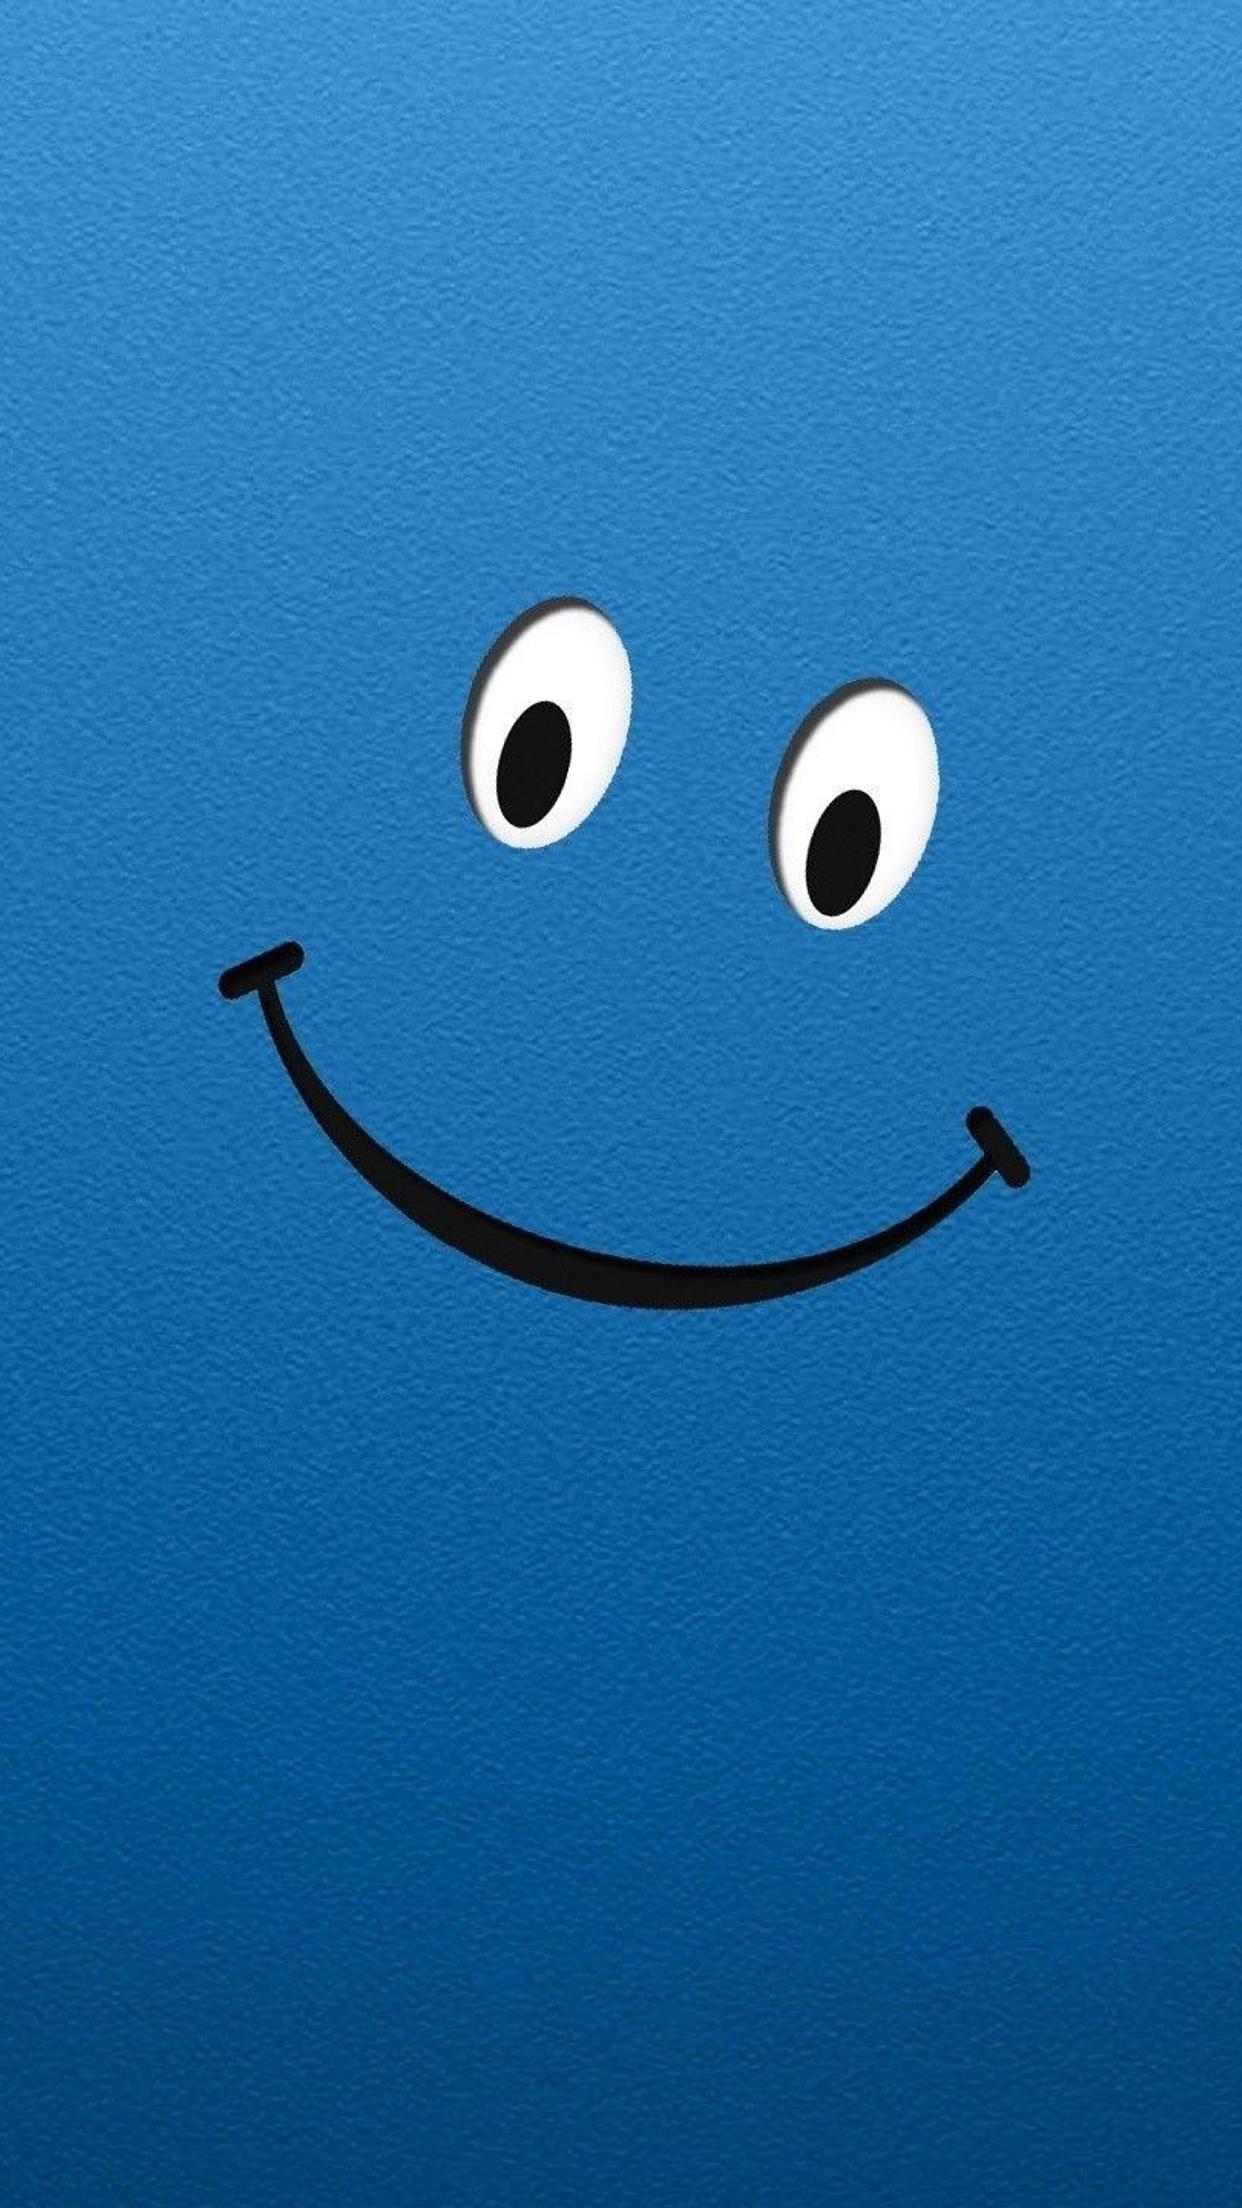 Two eyes and a happy smile face on a blue background